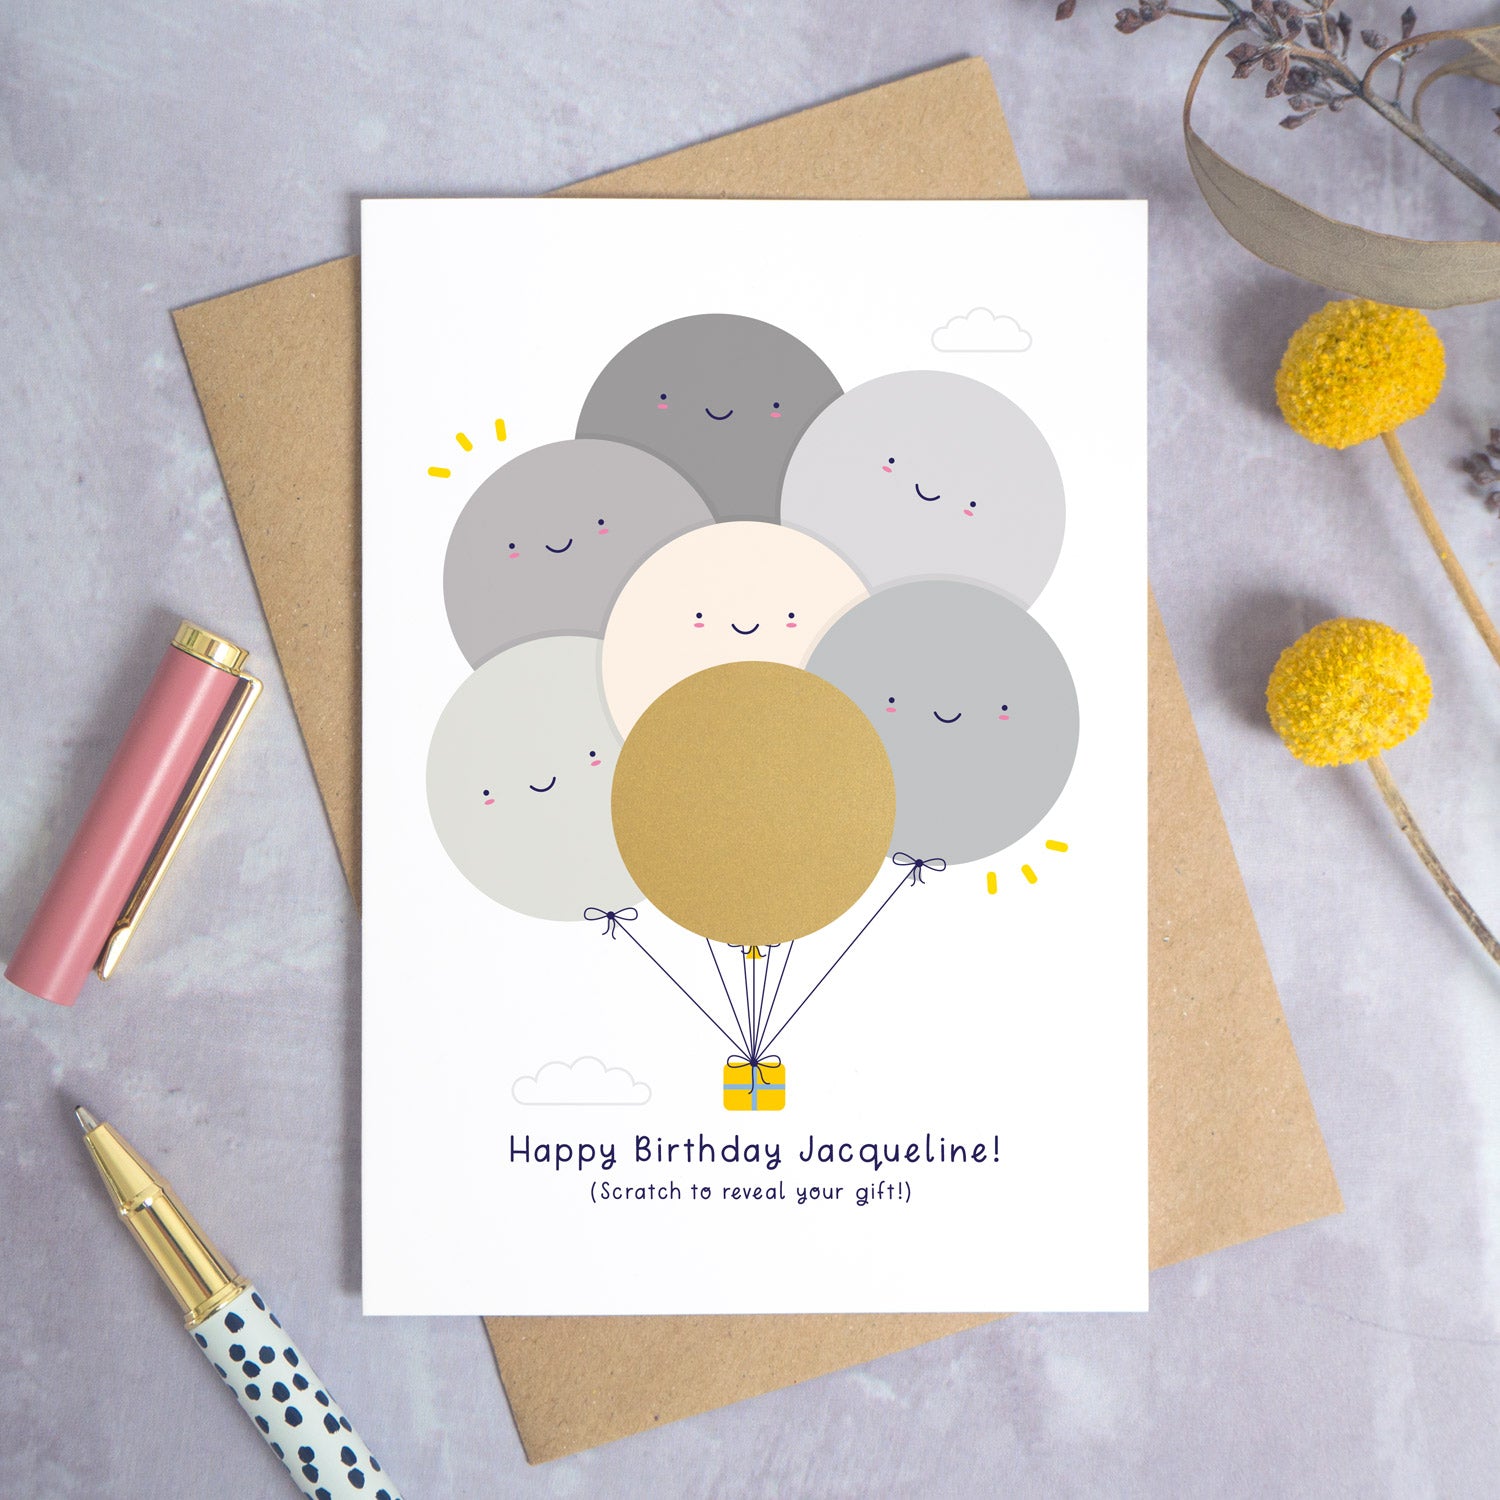 A ‘happy birthday’ scratch card photographed on a grey background with a pen on the left and yellow and purple flowers on the right. This is the grey version of the card before the gold panel has been scratched off.